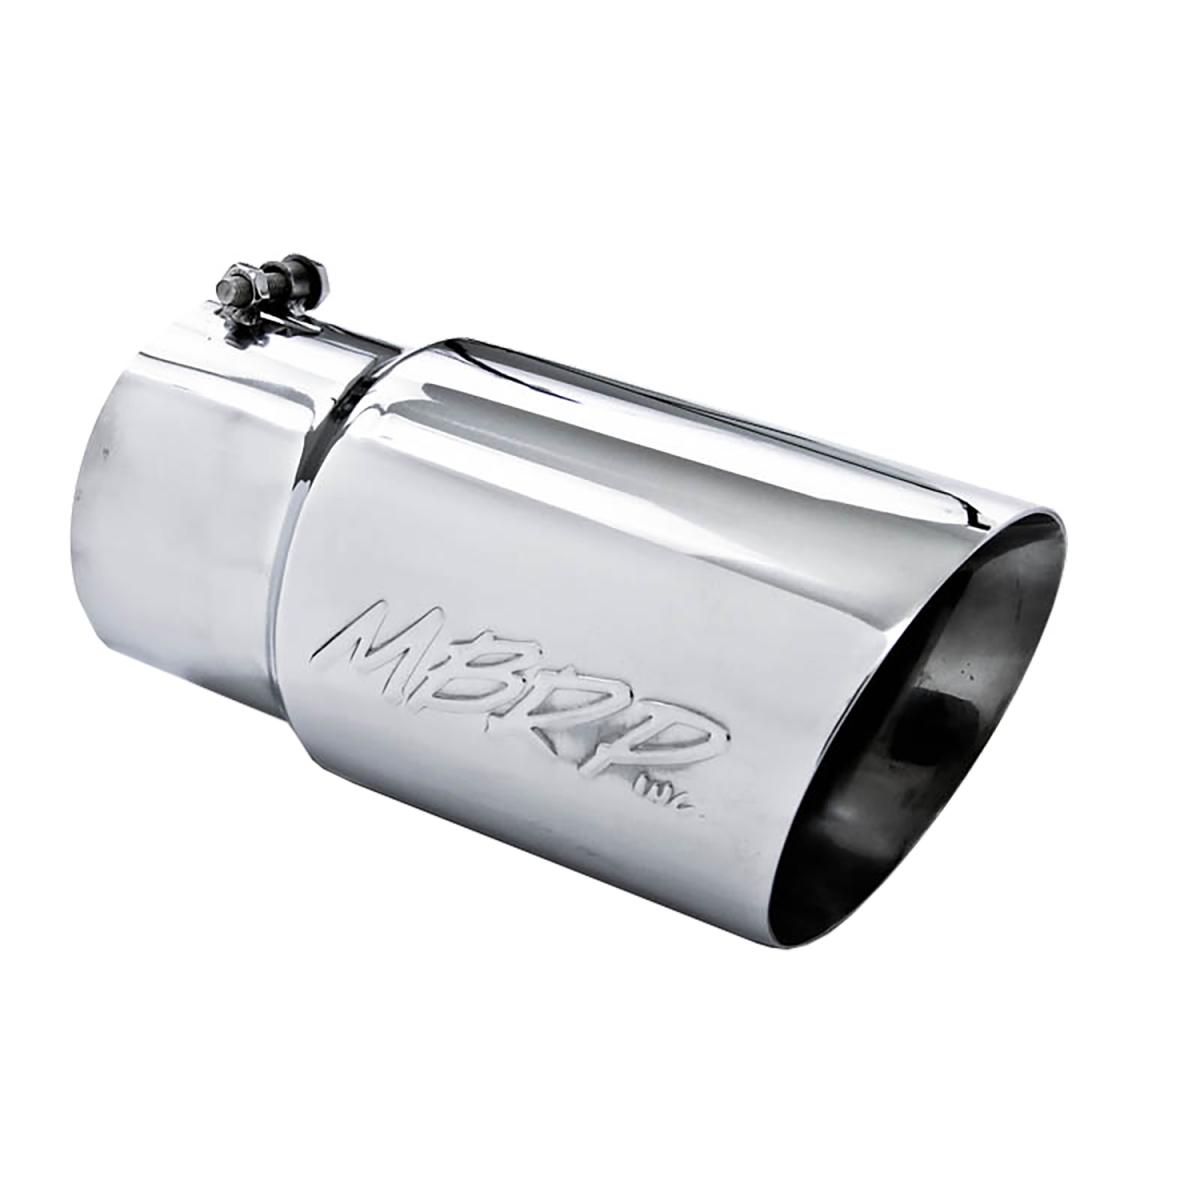 MBRP - MBRP Exhaust Tail Pipe Tip 6 Inch O.D. Dual Wall Angled 5 Inch Inlet 12 Inch Length T304 Stainless Steel T5074